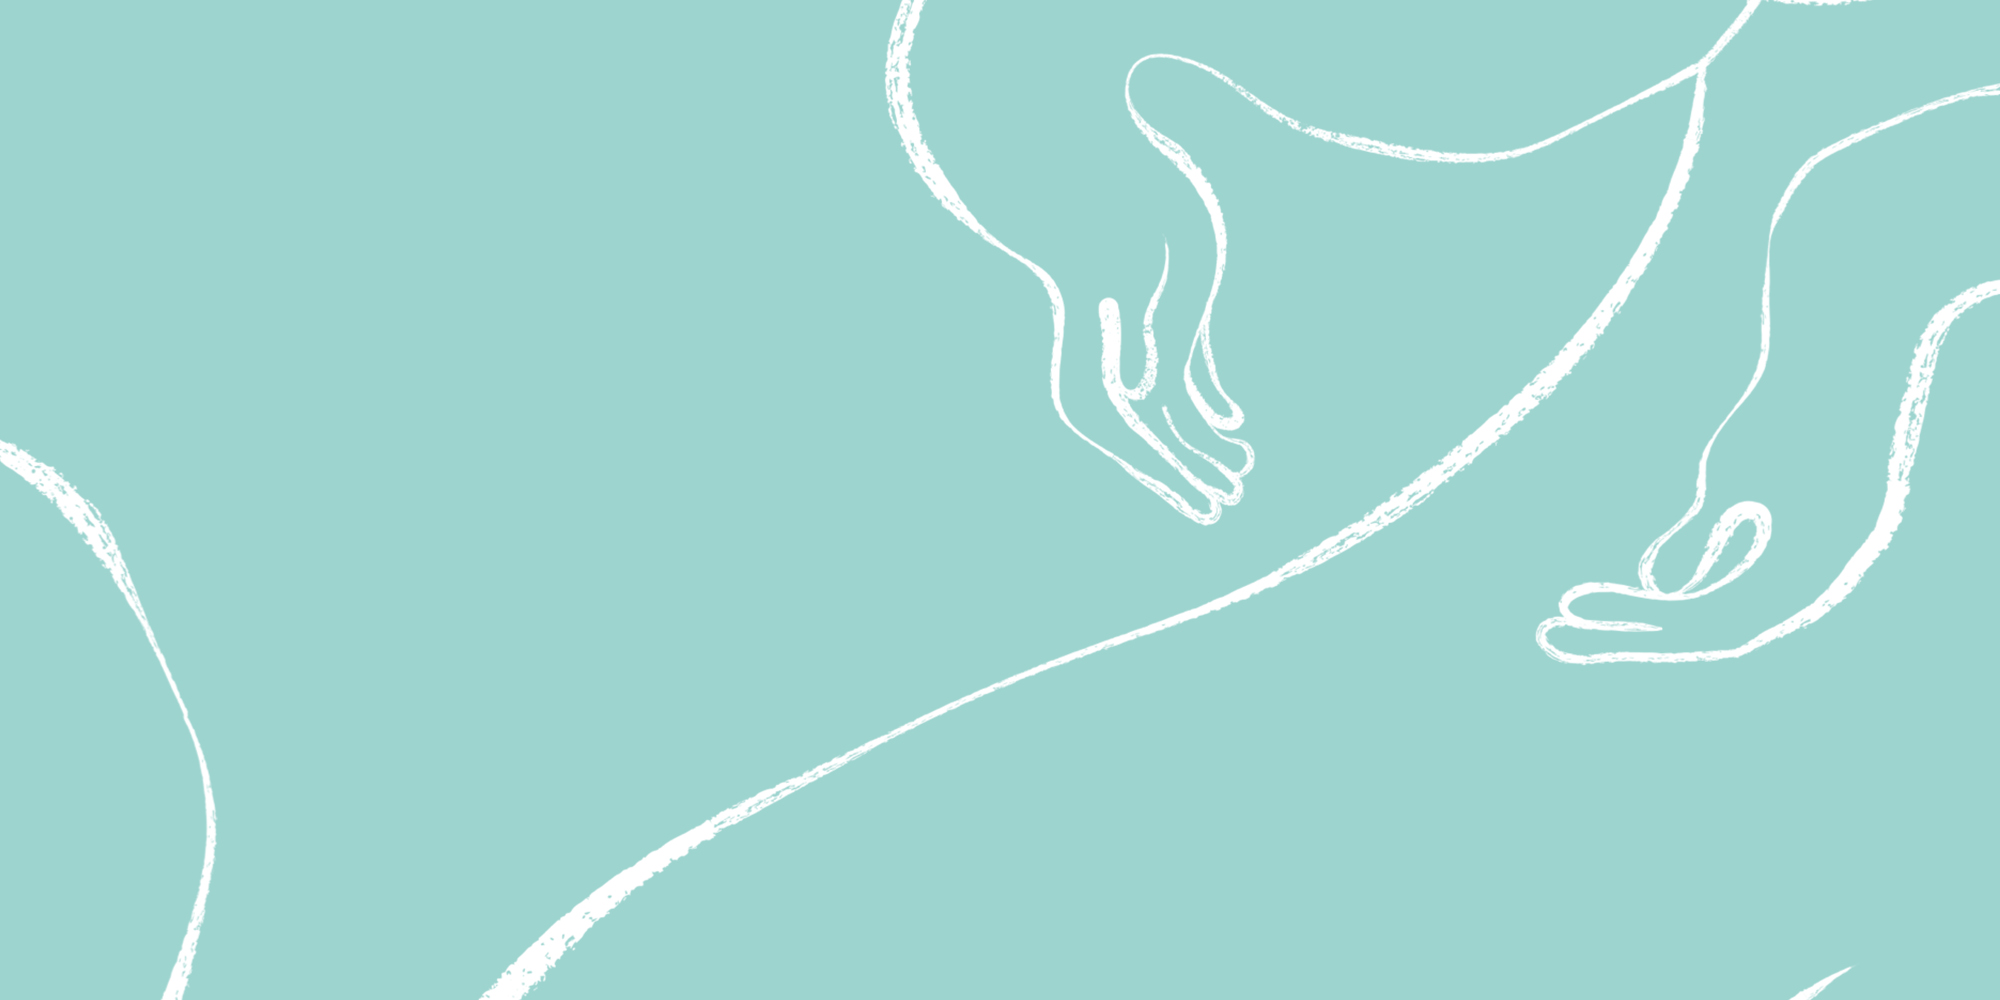 teal background with hand drawn human hands